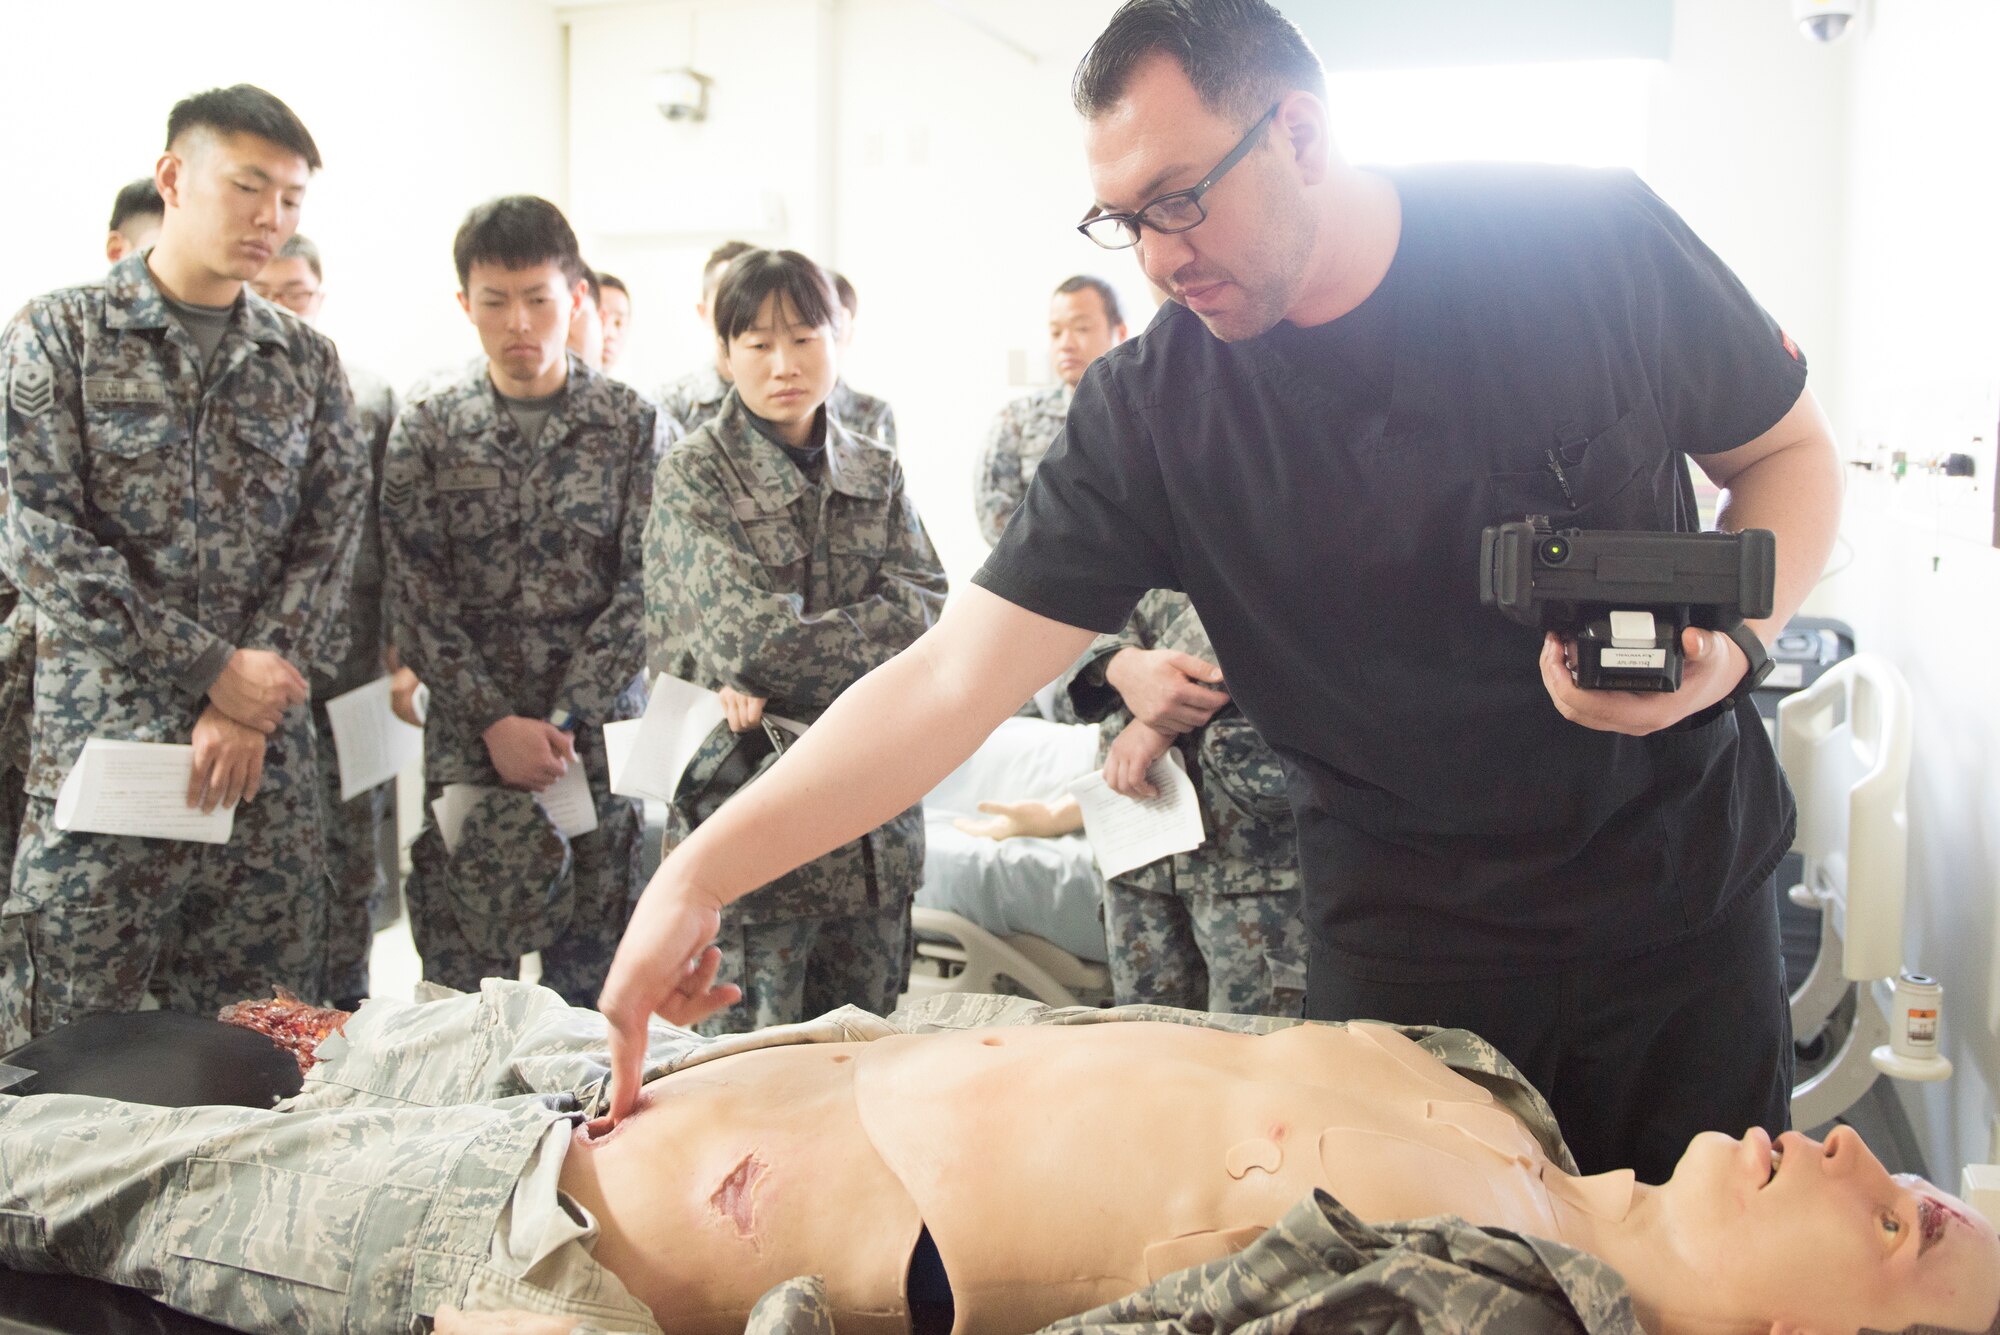 Dominic Trujillo-Hobbs, 374th Medical Group simulation operator, briefs Japan Air Self-Defense Force members on the capabilities of a patient simulator and how it helps with medical education and training, Feb.12, 2020, at Yokota Air Base, Japan.